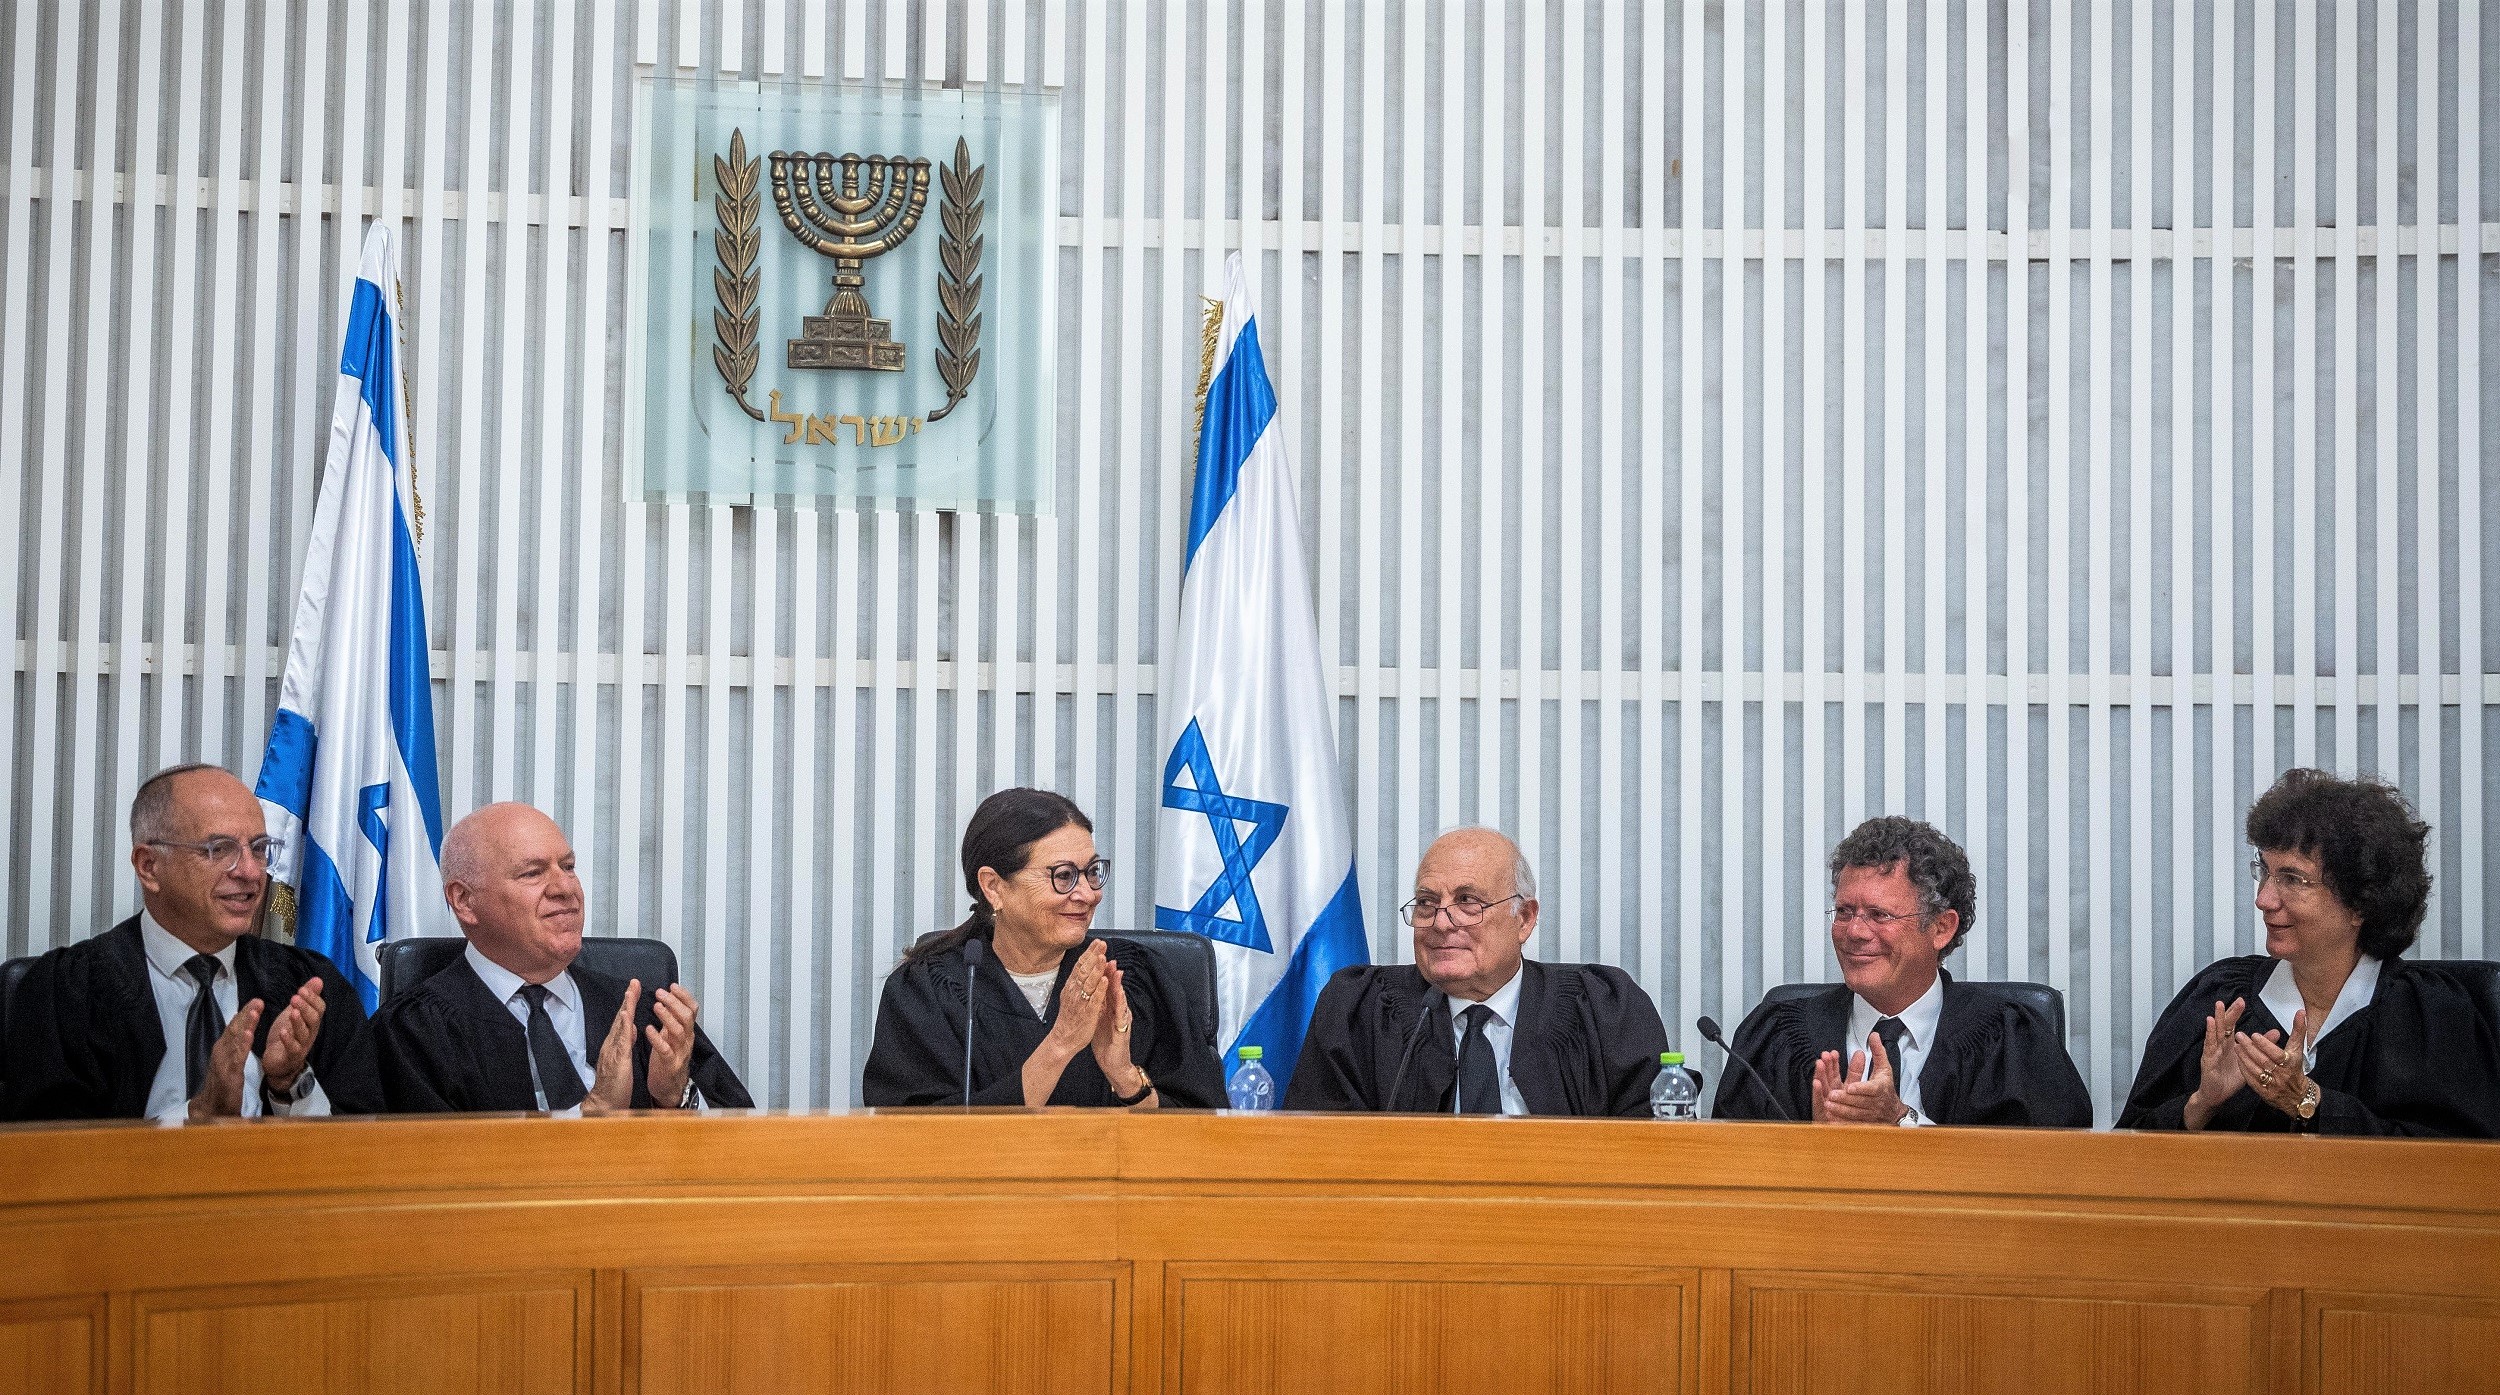 The first priority for Israel is Supreme Court reform JNS org